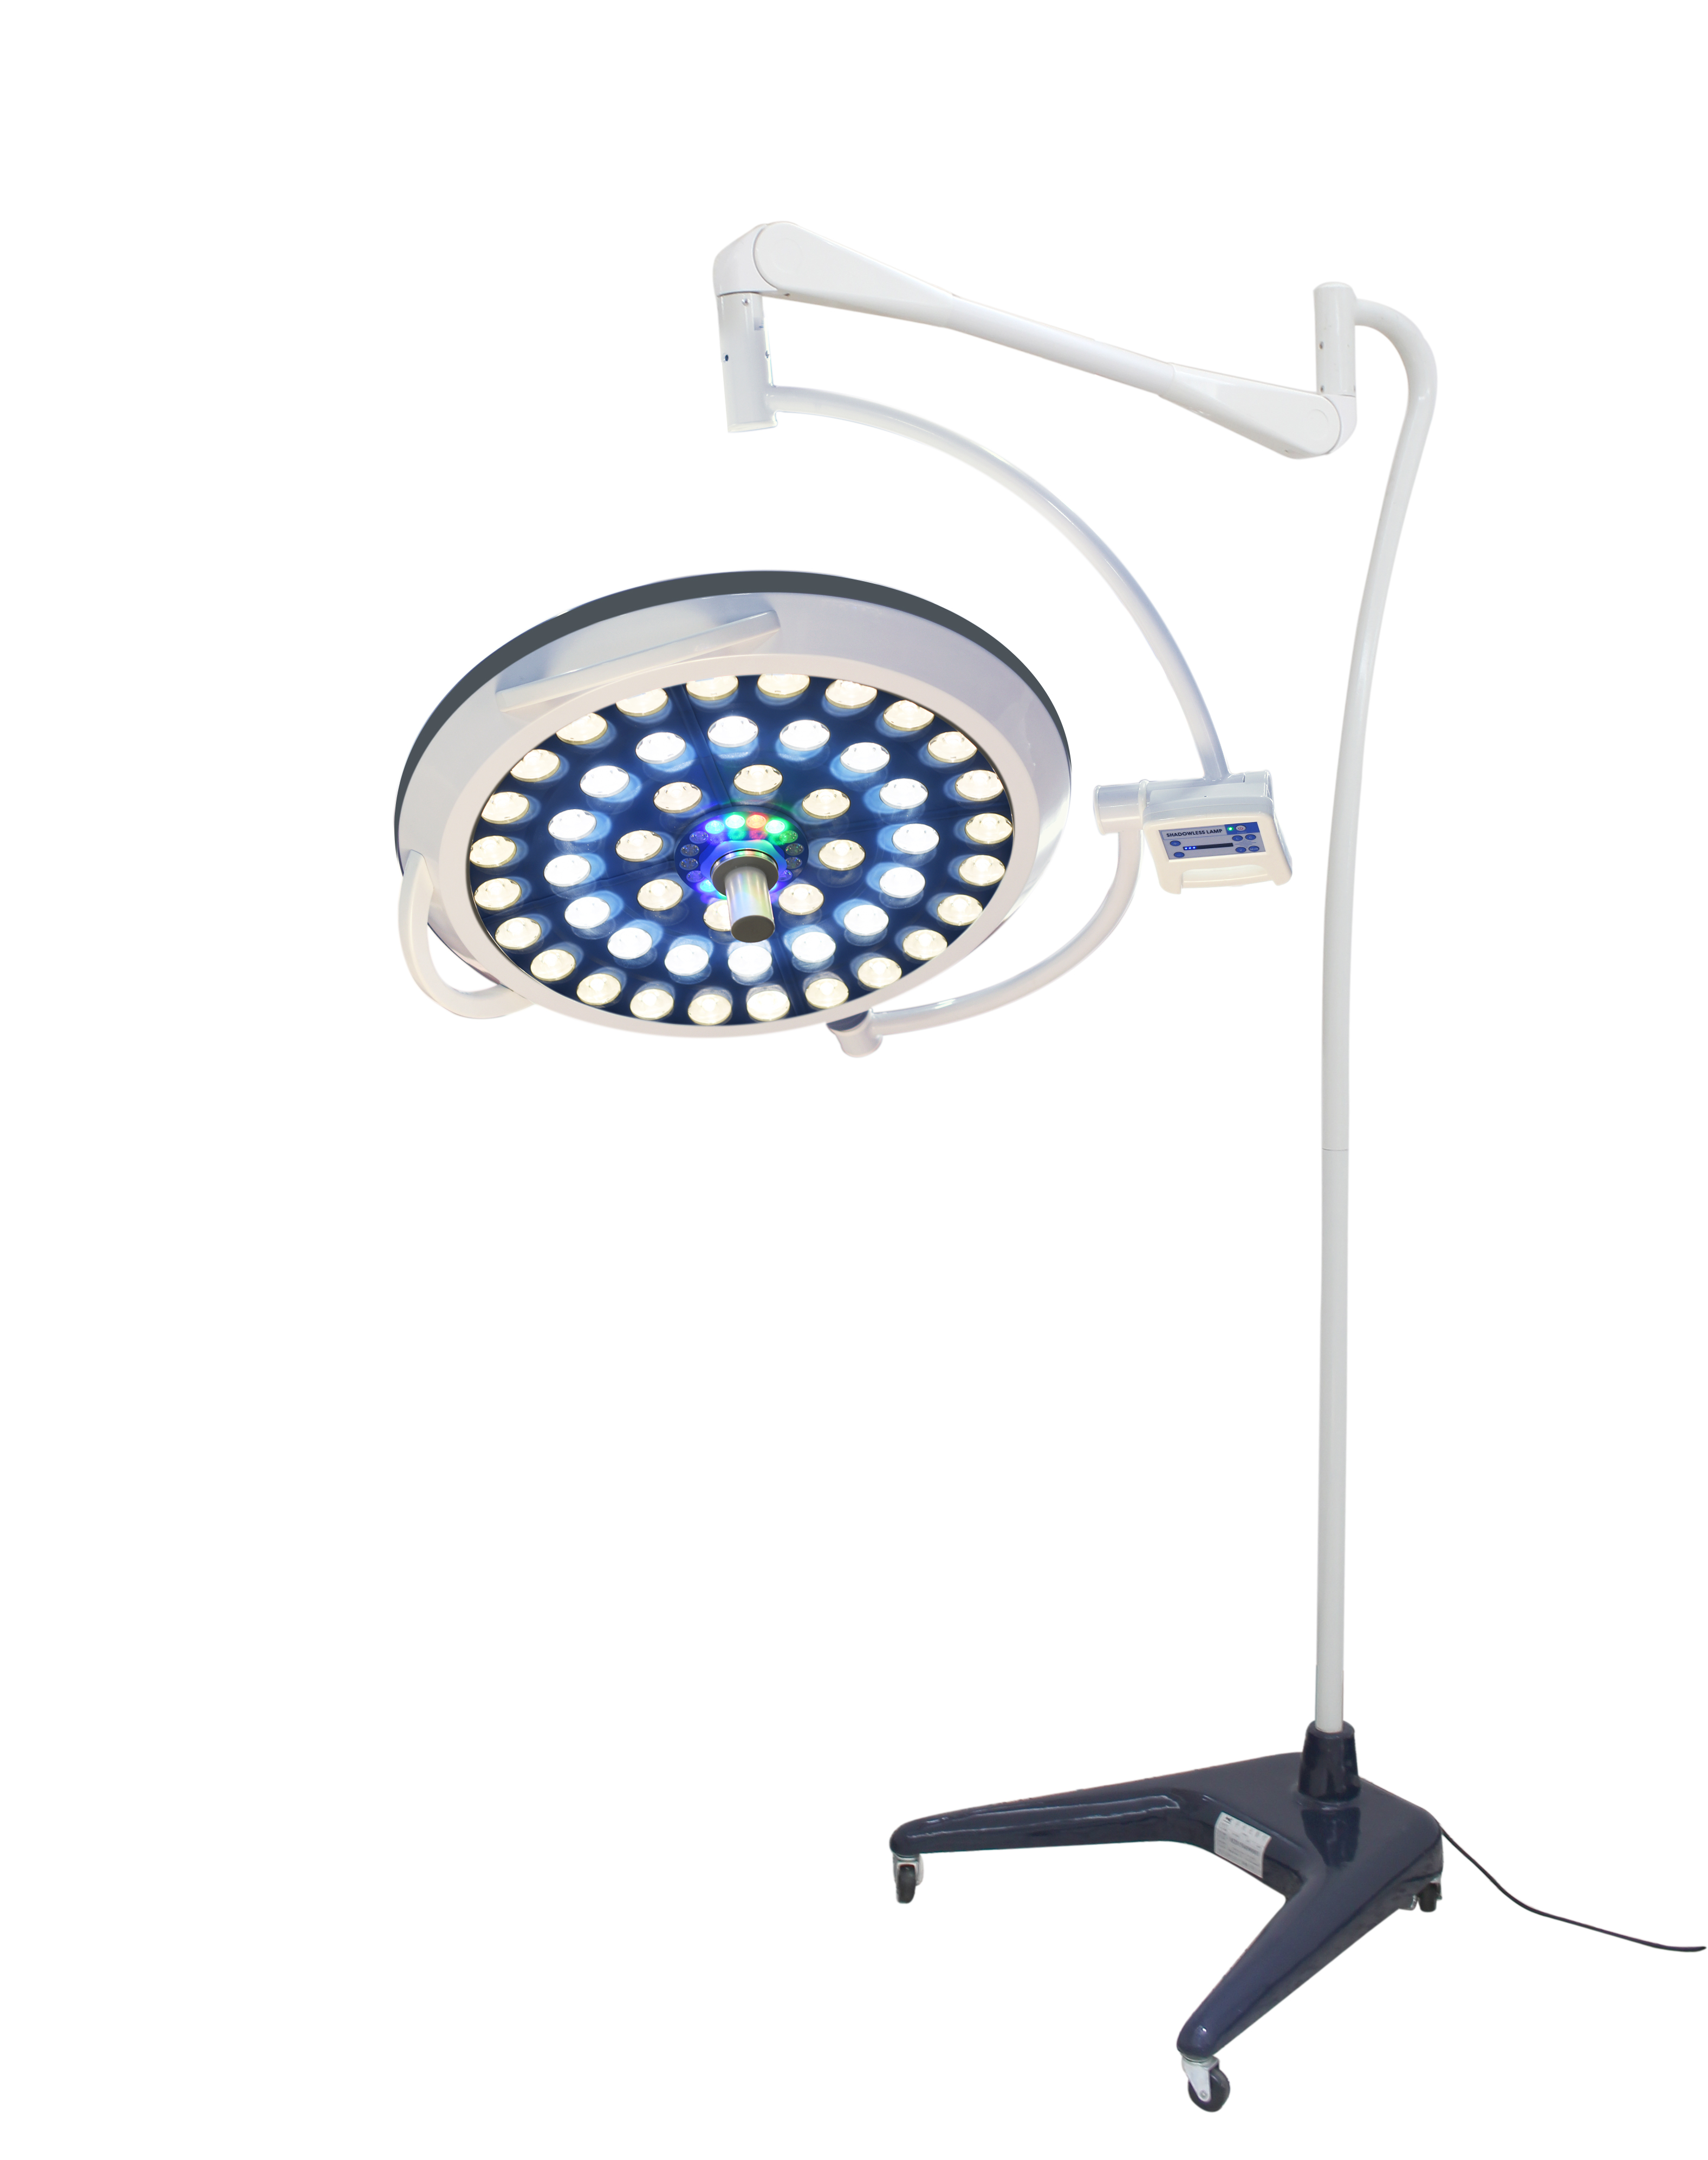 Factory directly supply Ceiling Light For Operation Room - Medical Surgical Exam Light Mobile Shadowless Lamp Adjustable – Micare